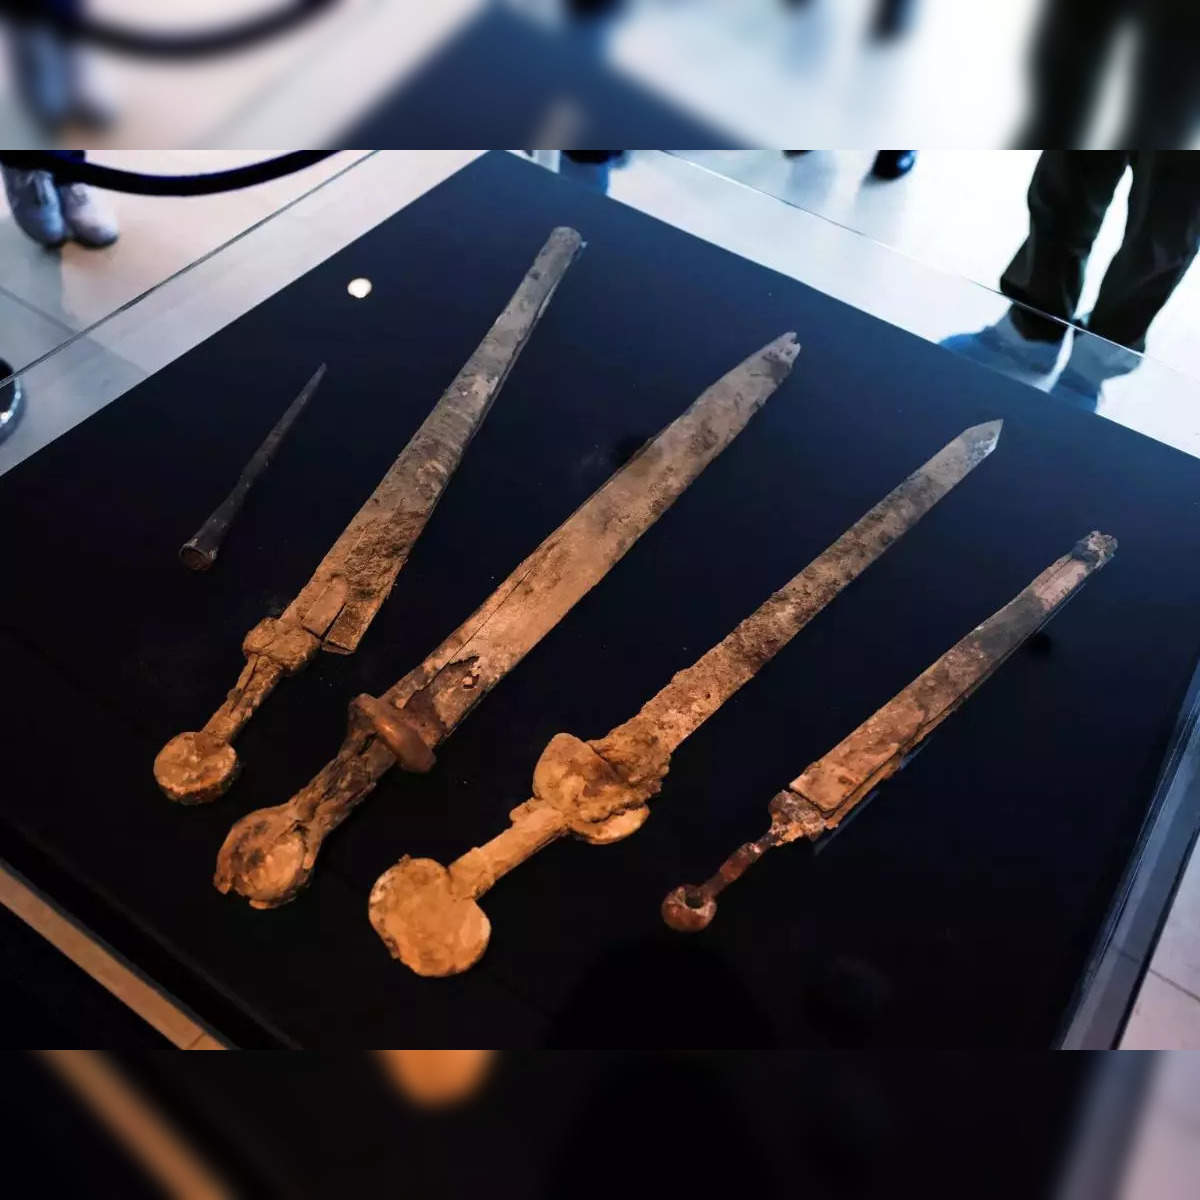 roman: Four Roman-era swords & a javelin unearthed in a cave in Israel -  The Economic Times